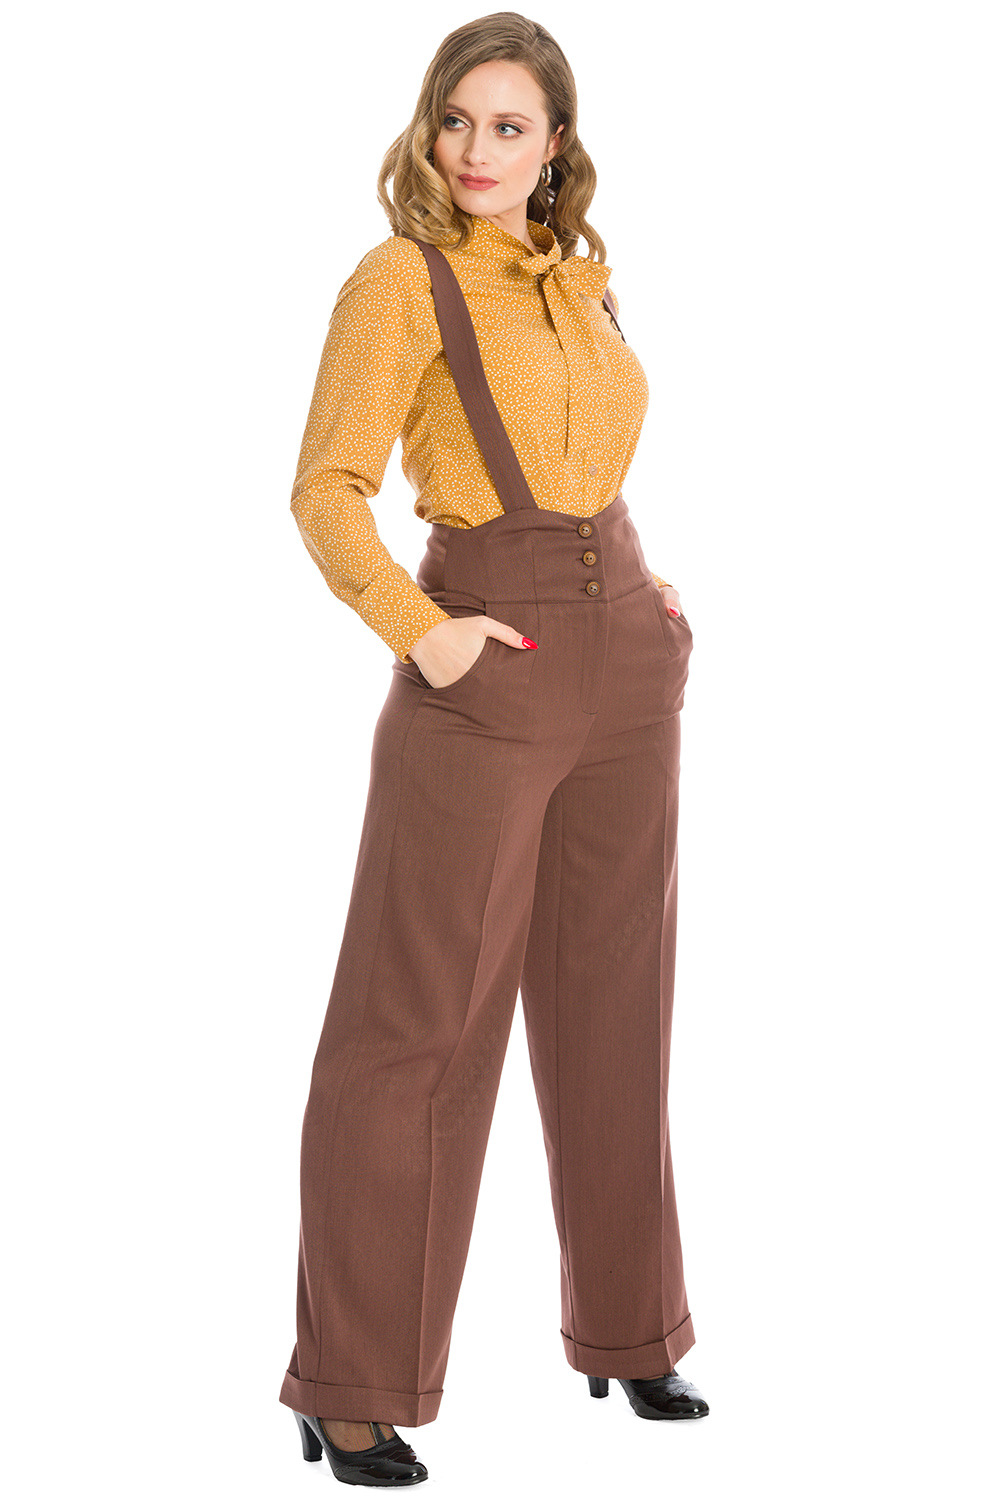 Banned Retro 40s Her Favourite Brown Trousers